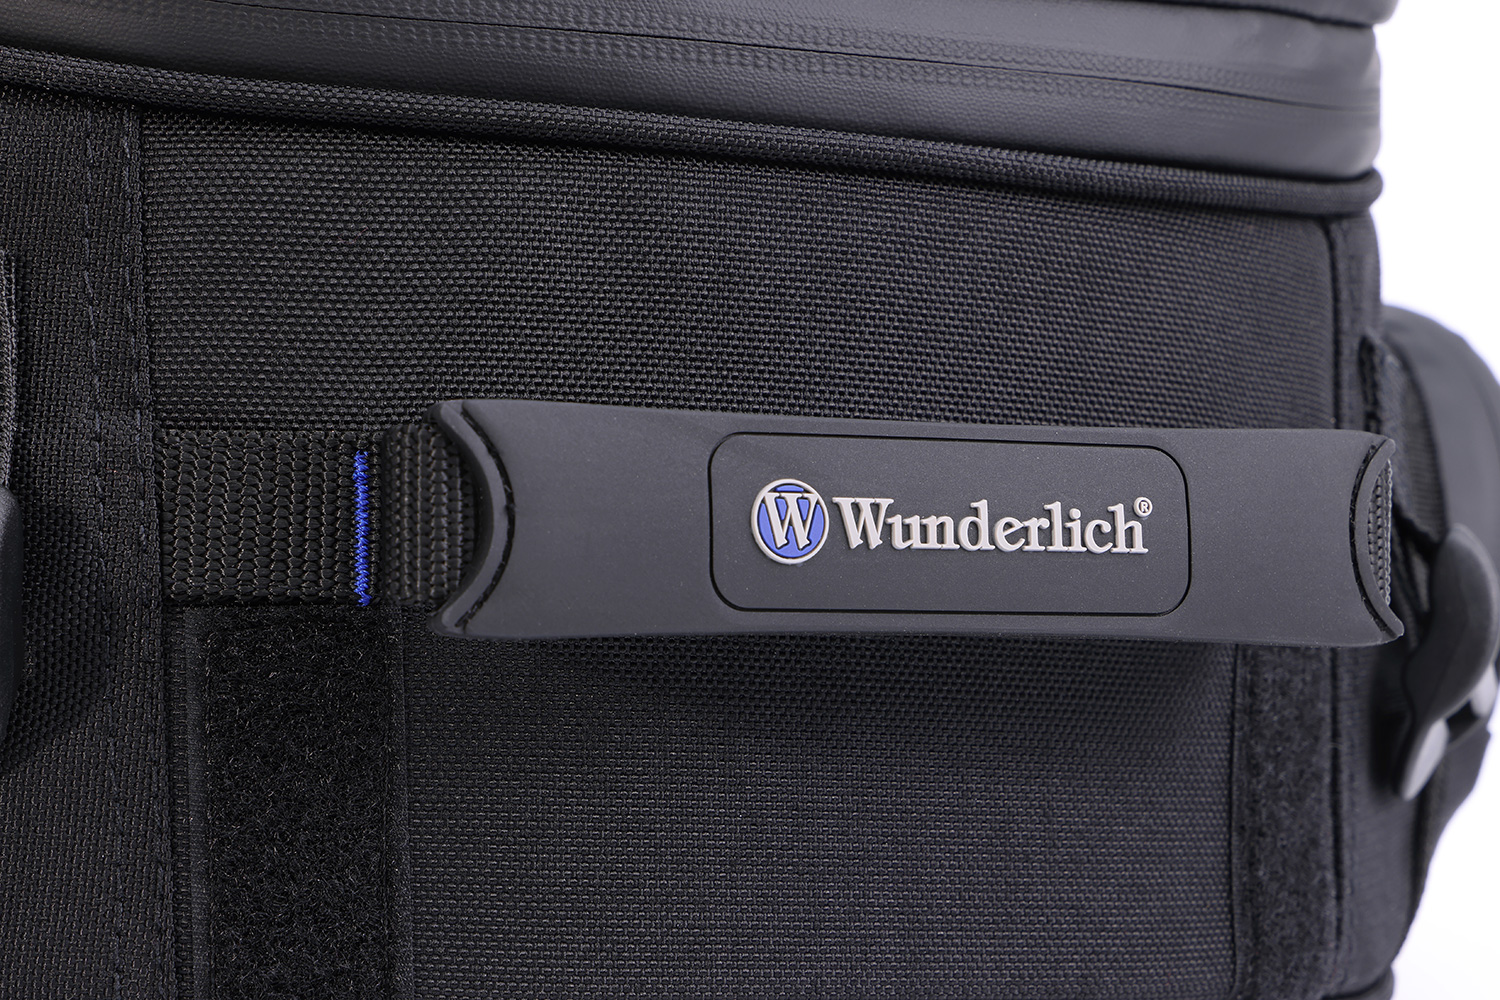 New Awsome Bags for Isotta and Wunderlich racks